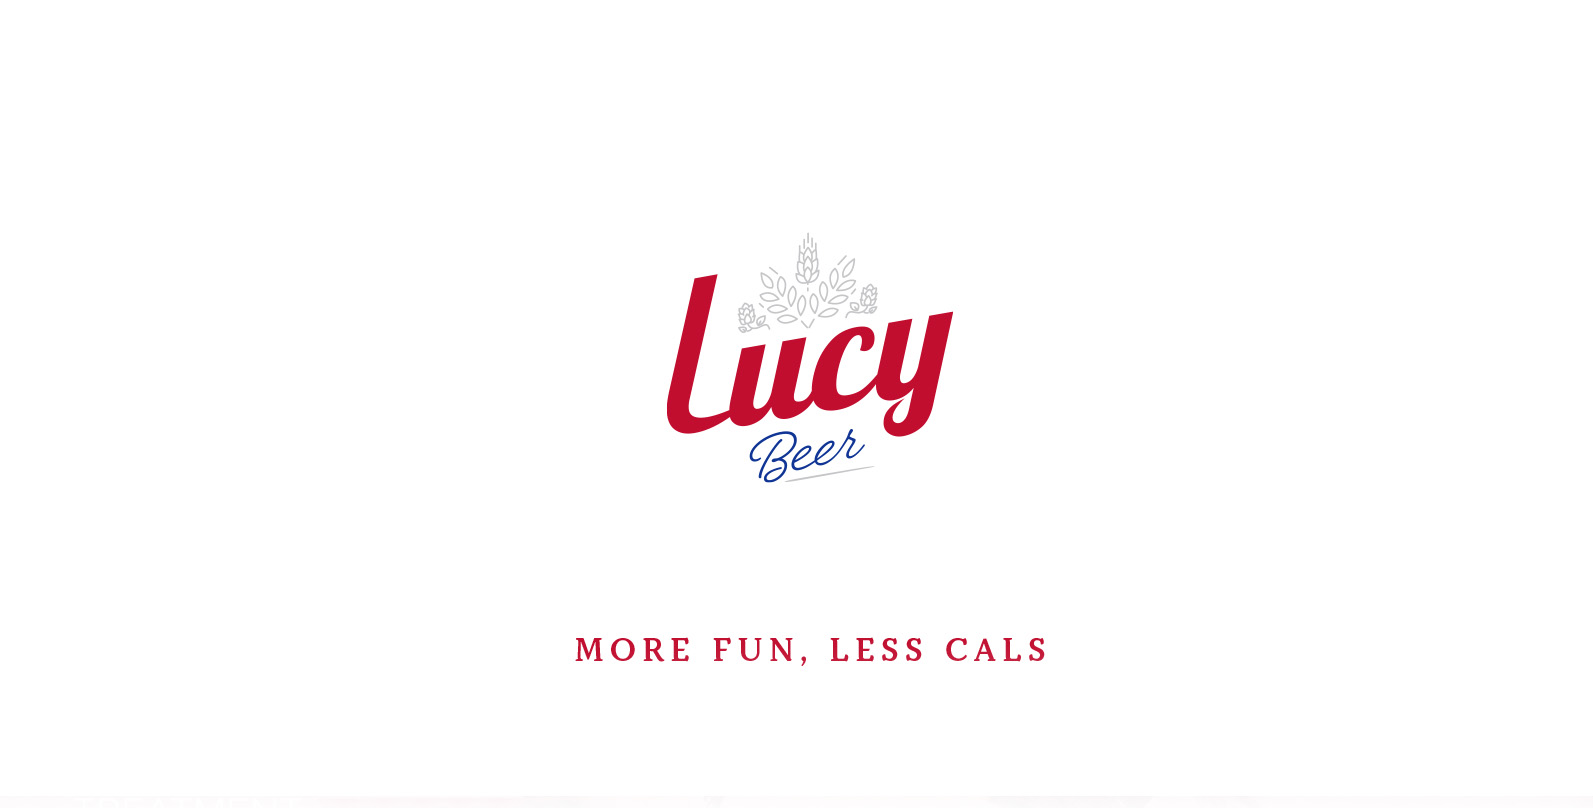 Logo a slogan Lucy Beer